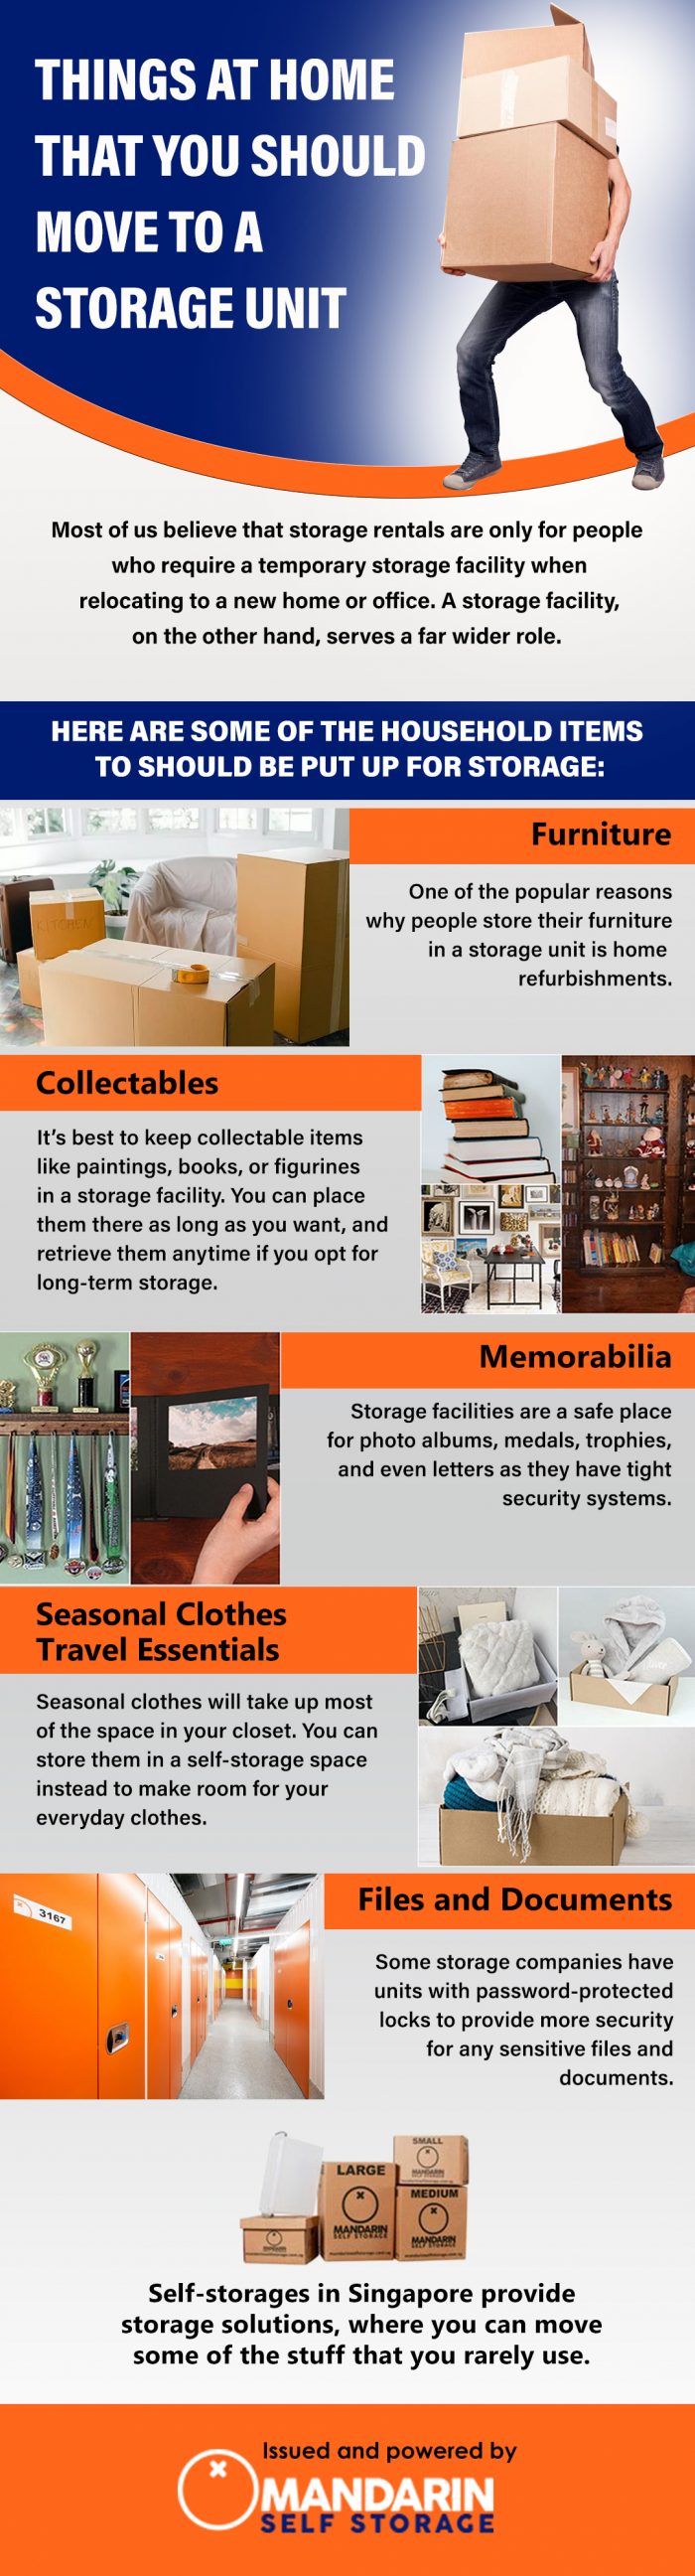 Things at Home that You Should Move in a Storage Unit